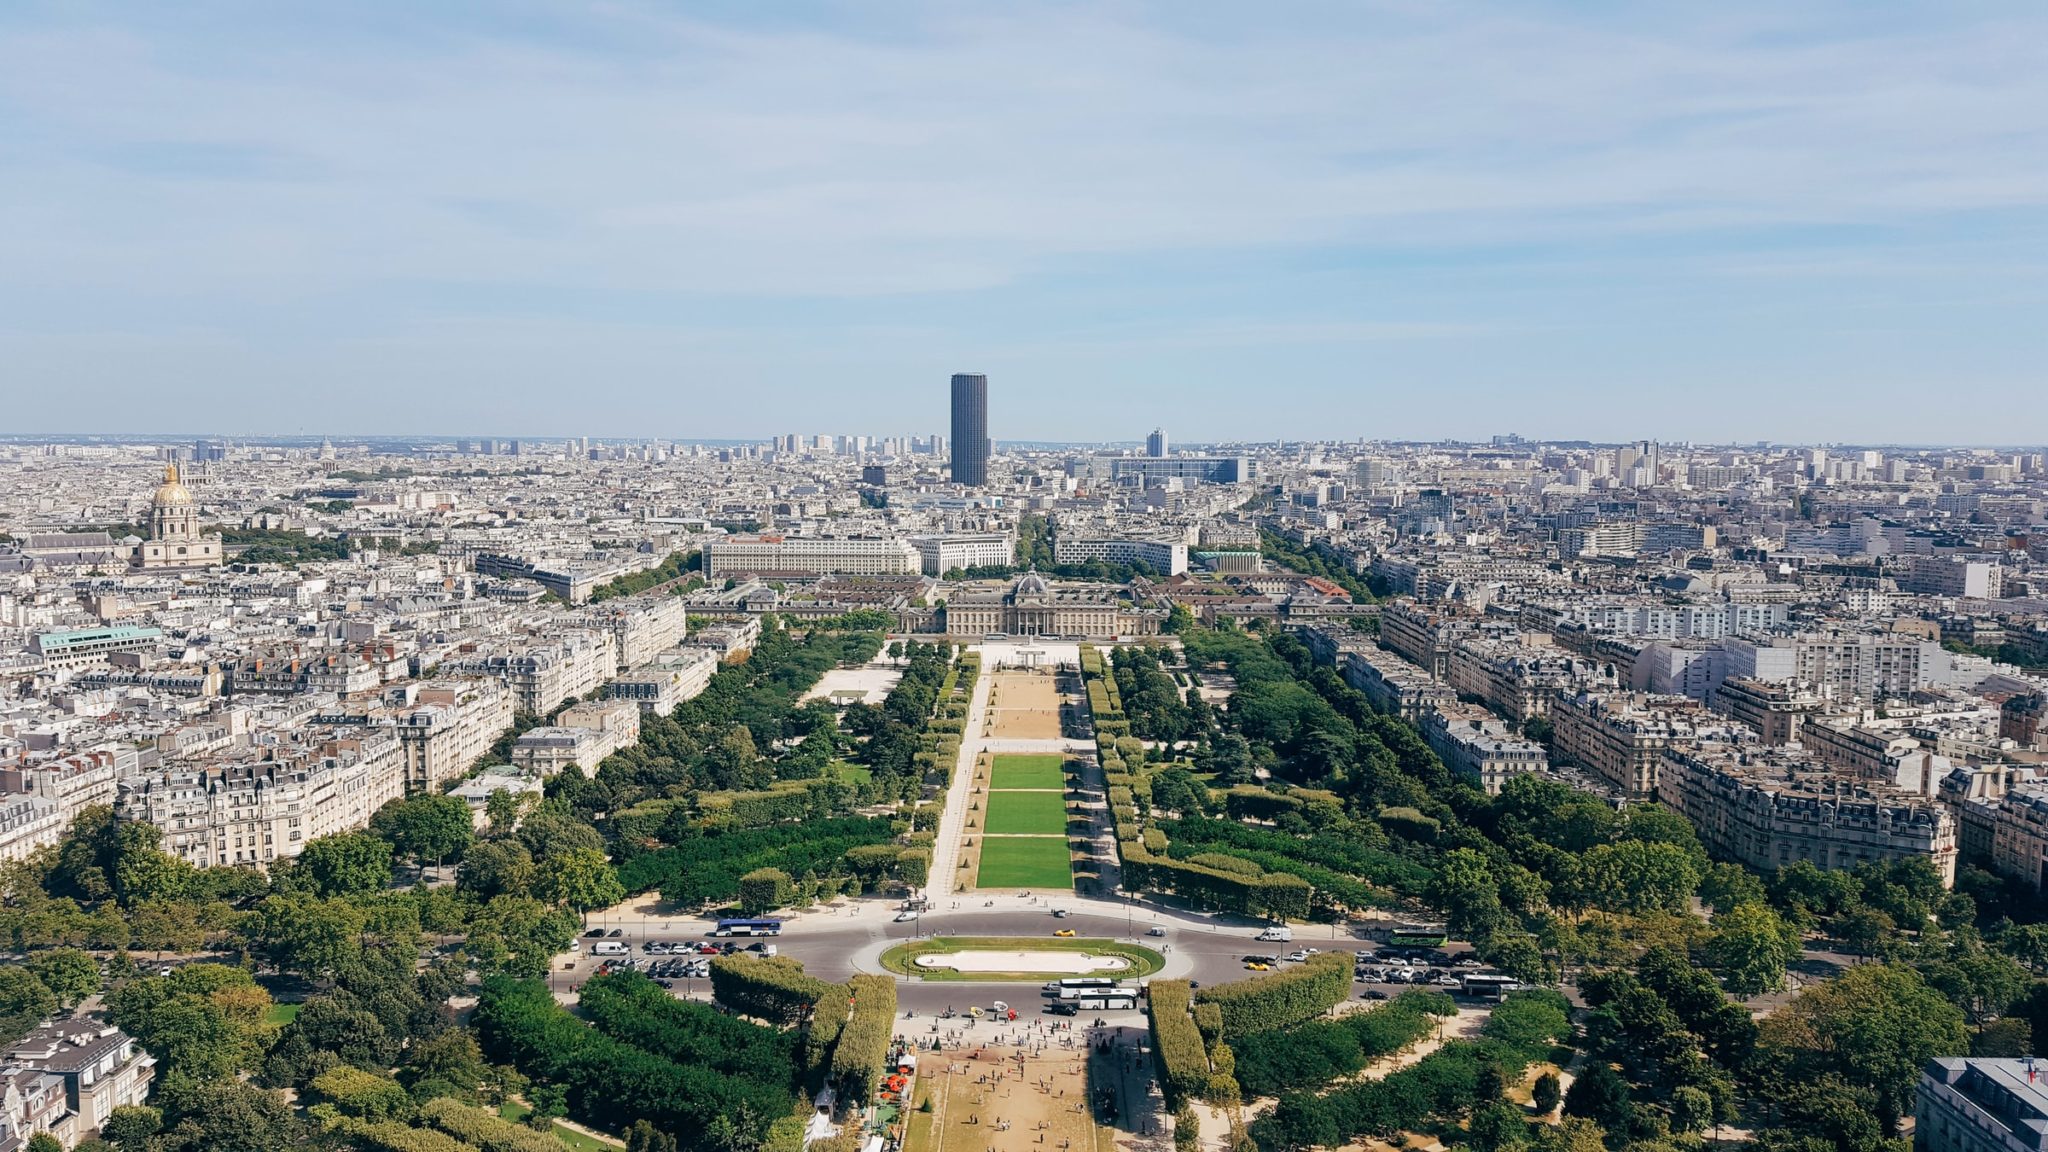 Top 10 Facts about the Champs de Mars in Paris - Discover Walks Blog